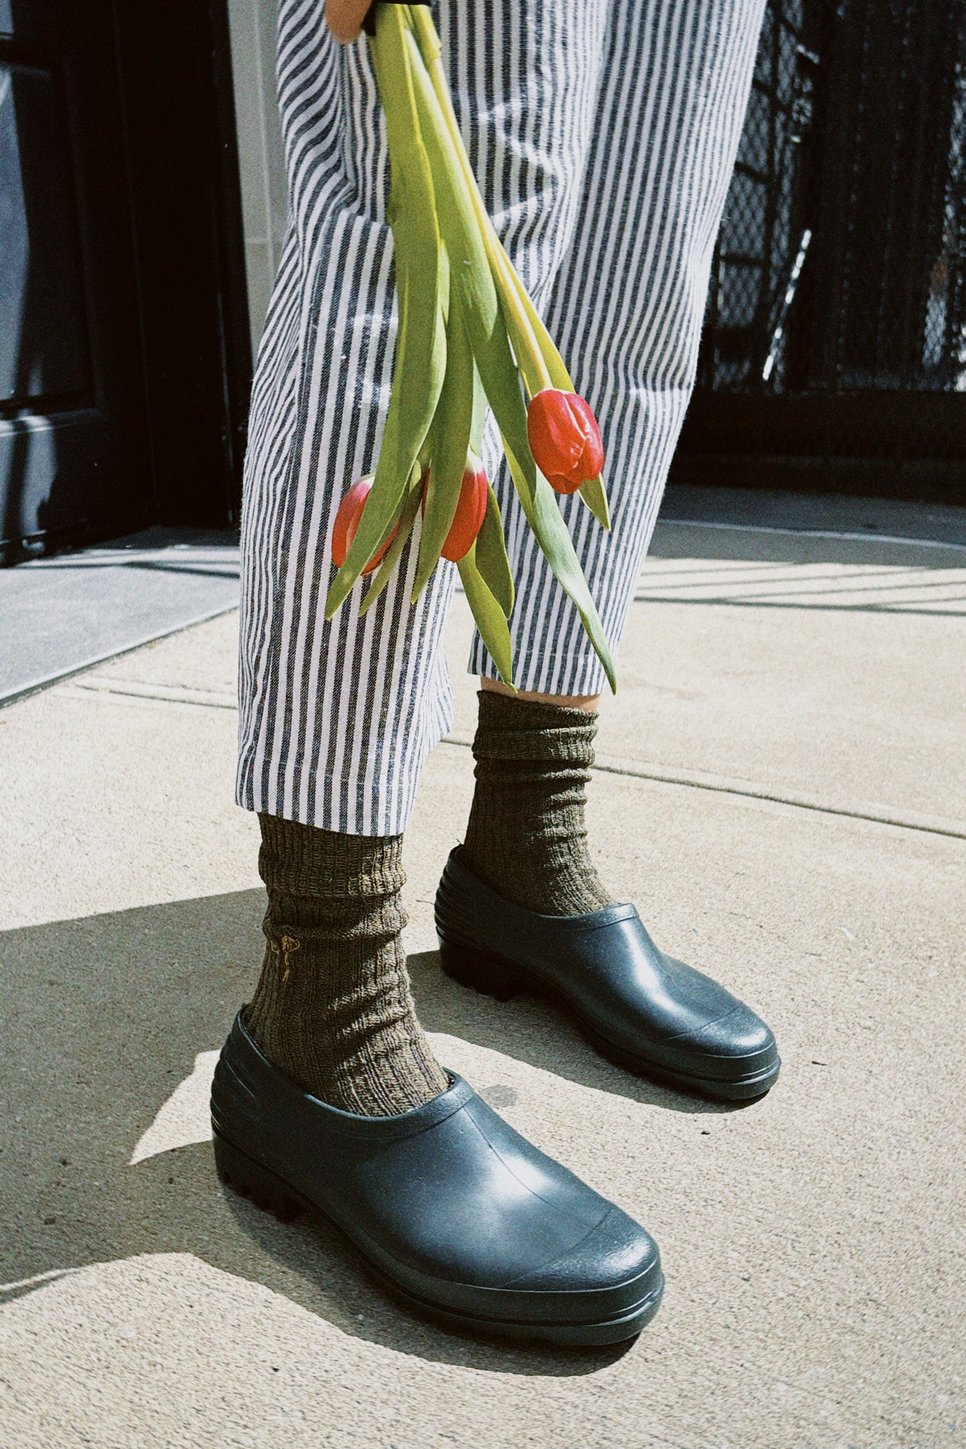 https://www.cloakanddaggernyc.com/collections/footwear/products/vintage-grey-knee-high-boots-8